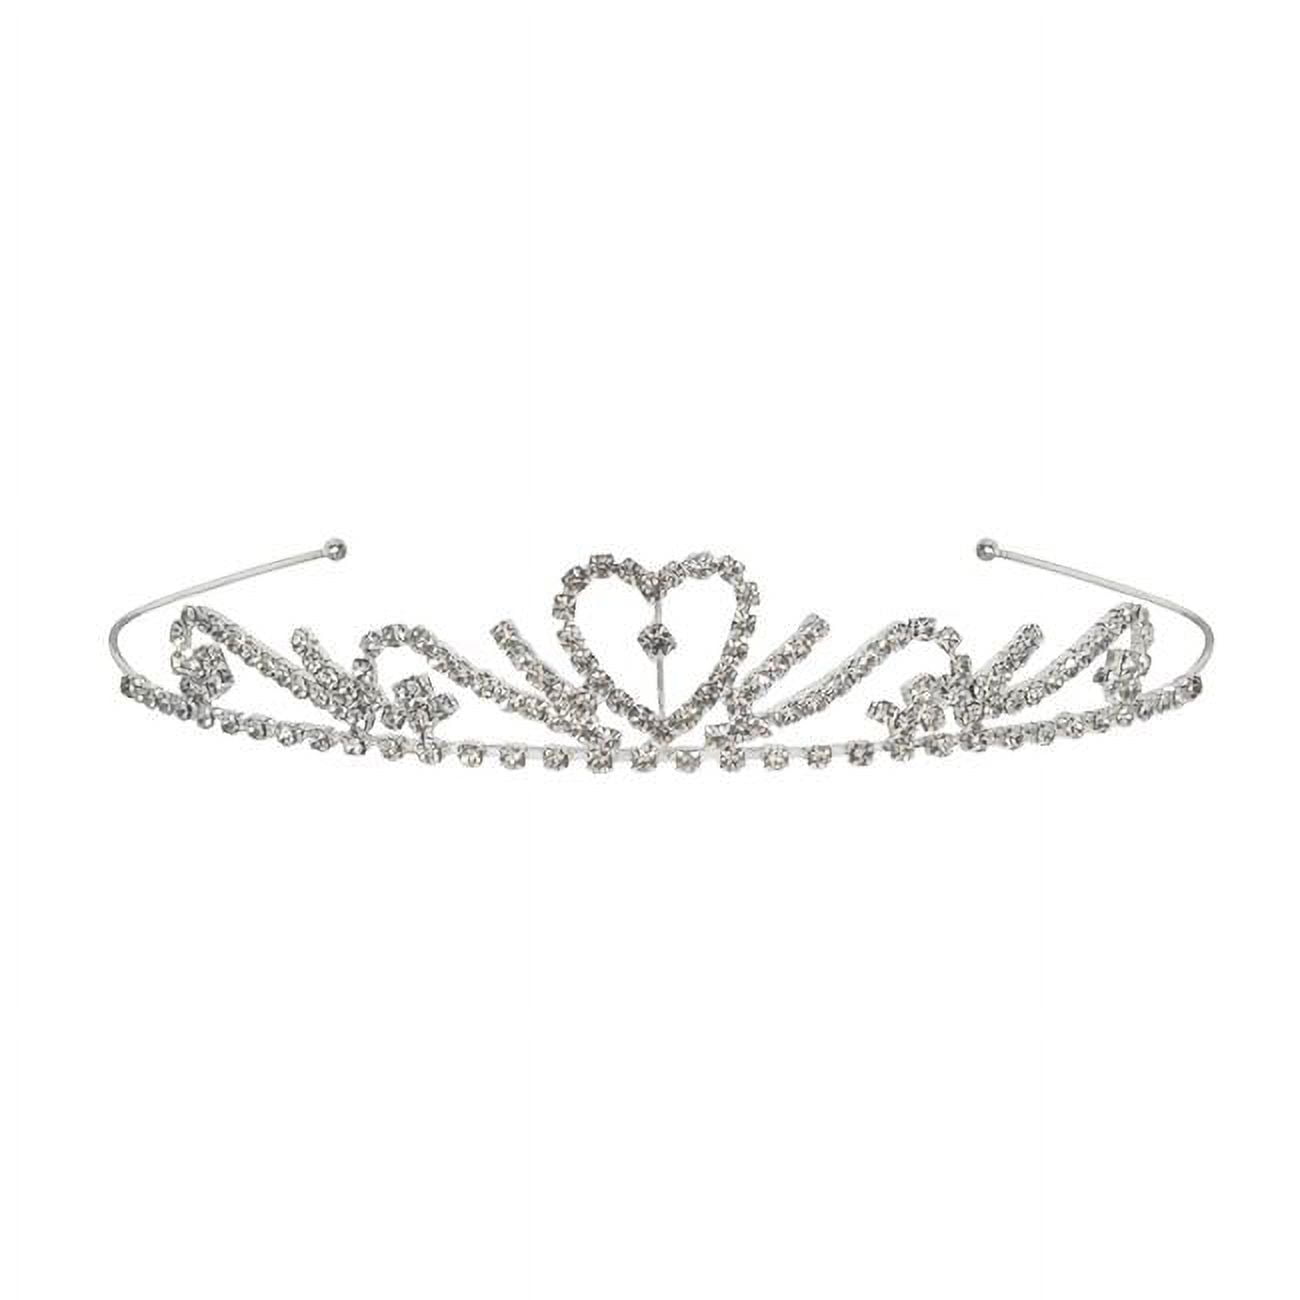 Picture of Beistle 60075 Royal Rhinestone Tiara, White - Pack of 6